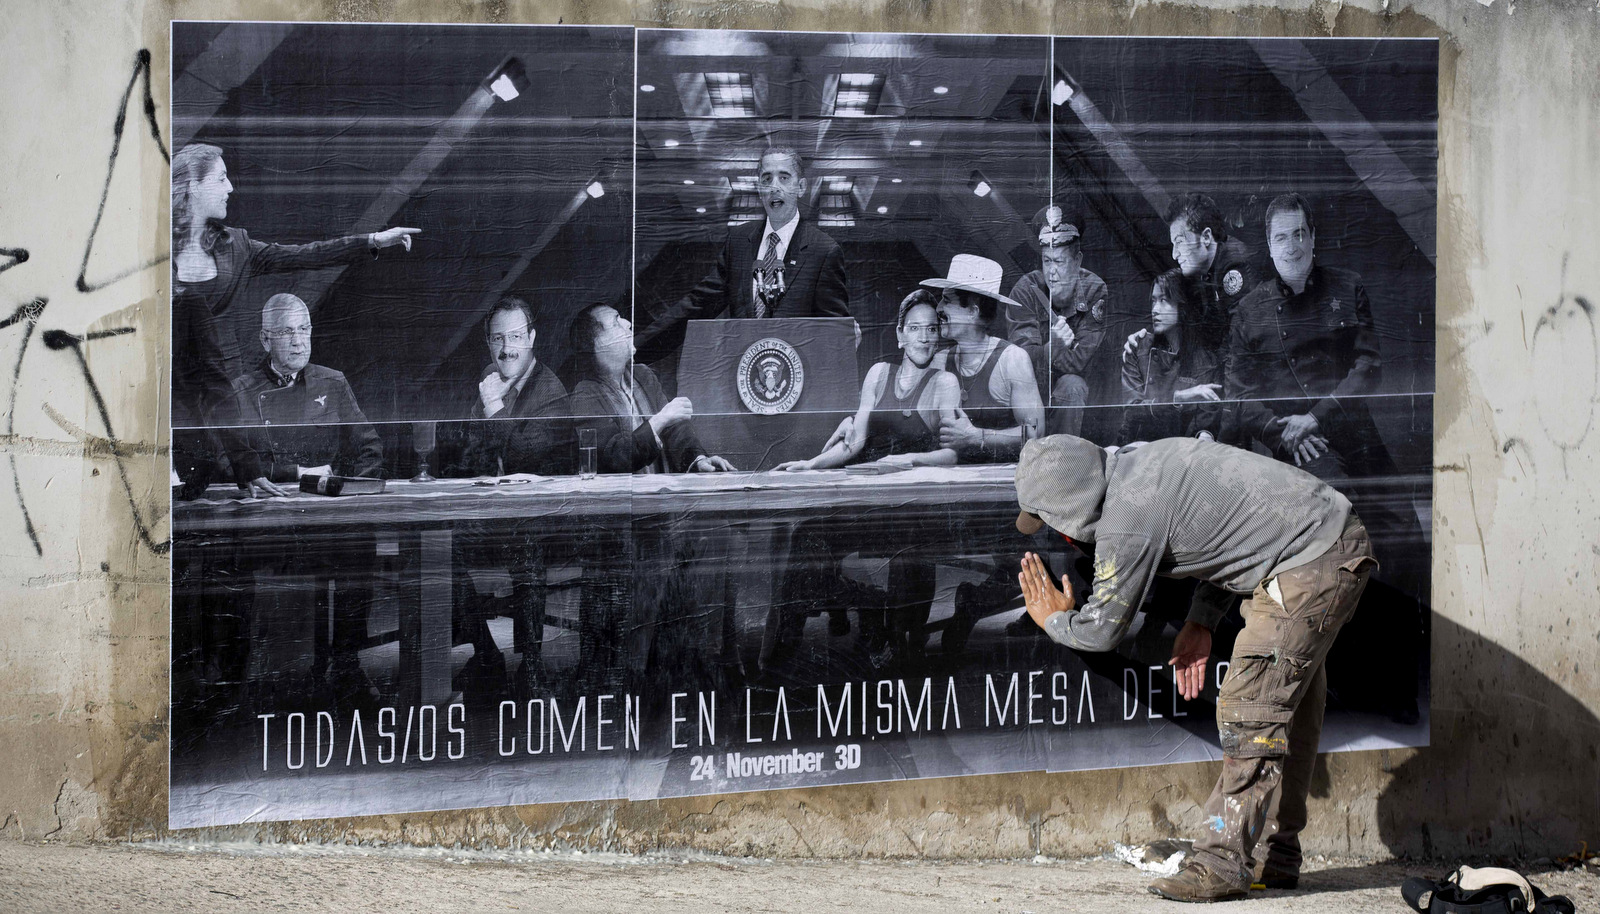 An artist who calls himself the Urban Maeztro who prefers to remain anonymous for security reasons pastes up one of his "interventions" that shows President Barack Obama at a podium surrounded by Honduran politicians and reads in Spanish "All eat at the same table as God" on a street wall days before elections in Tegucigalpa, Honduras, Nov. 21, 2013. (AP/Eduardo Verdugo)